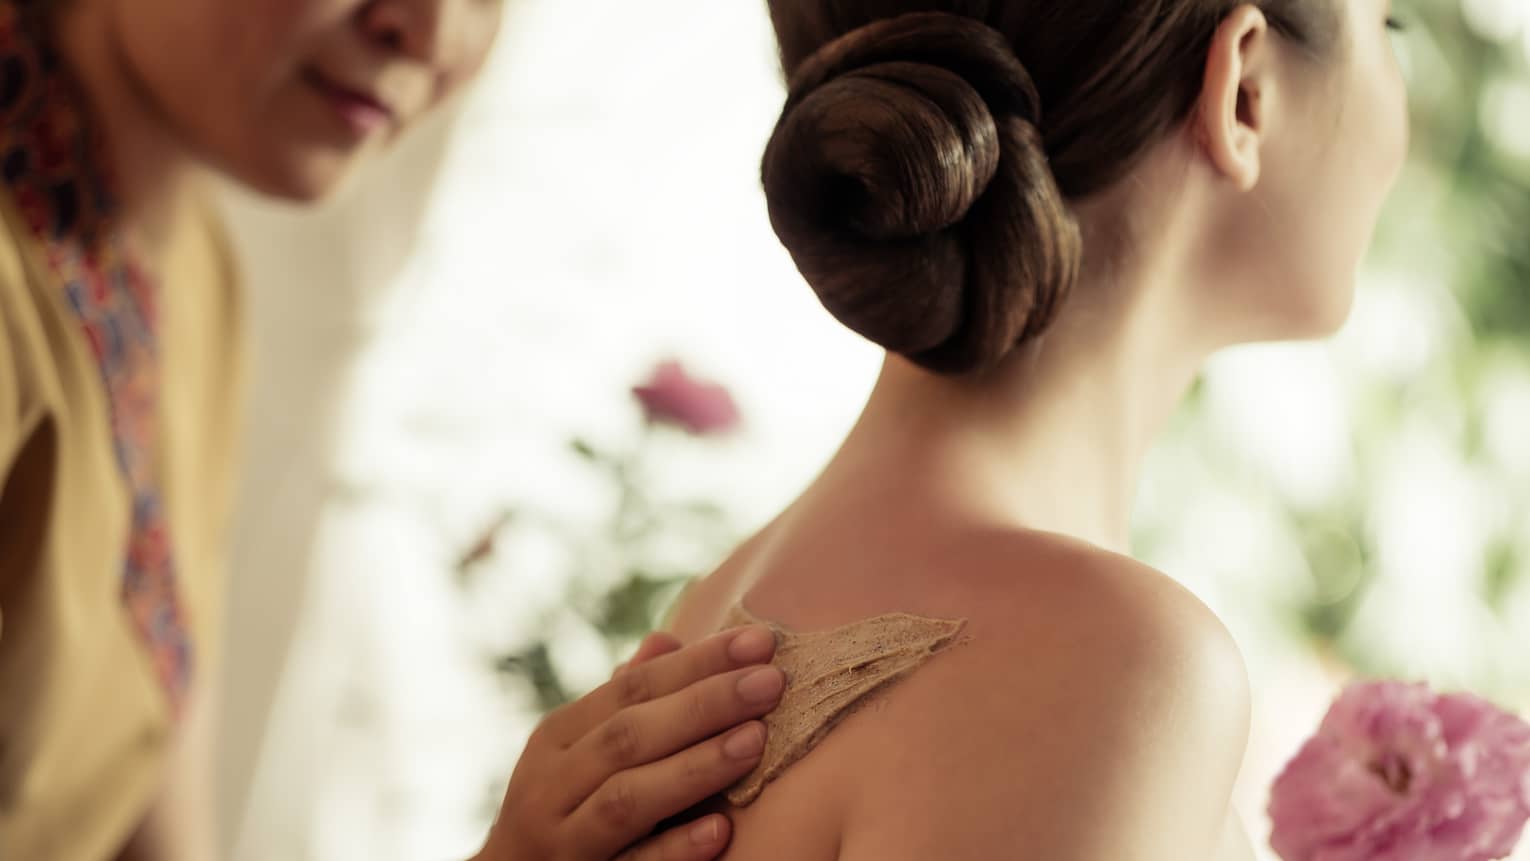 Spa staff rubs thick lotion on woman's bare shoulders as she holds a fresh flower